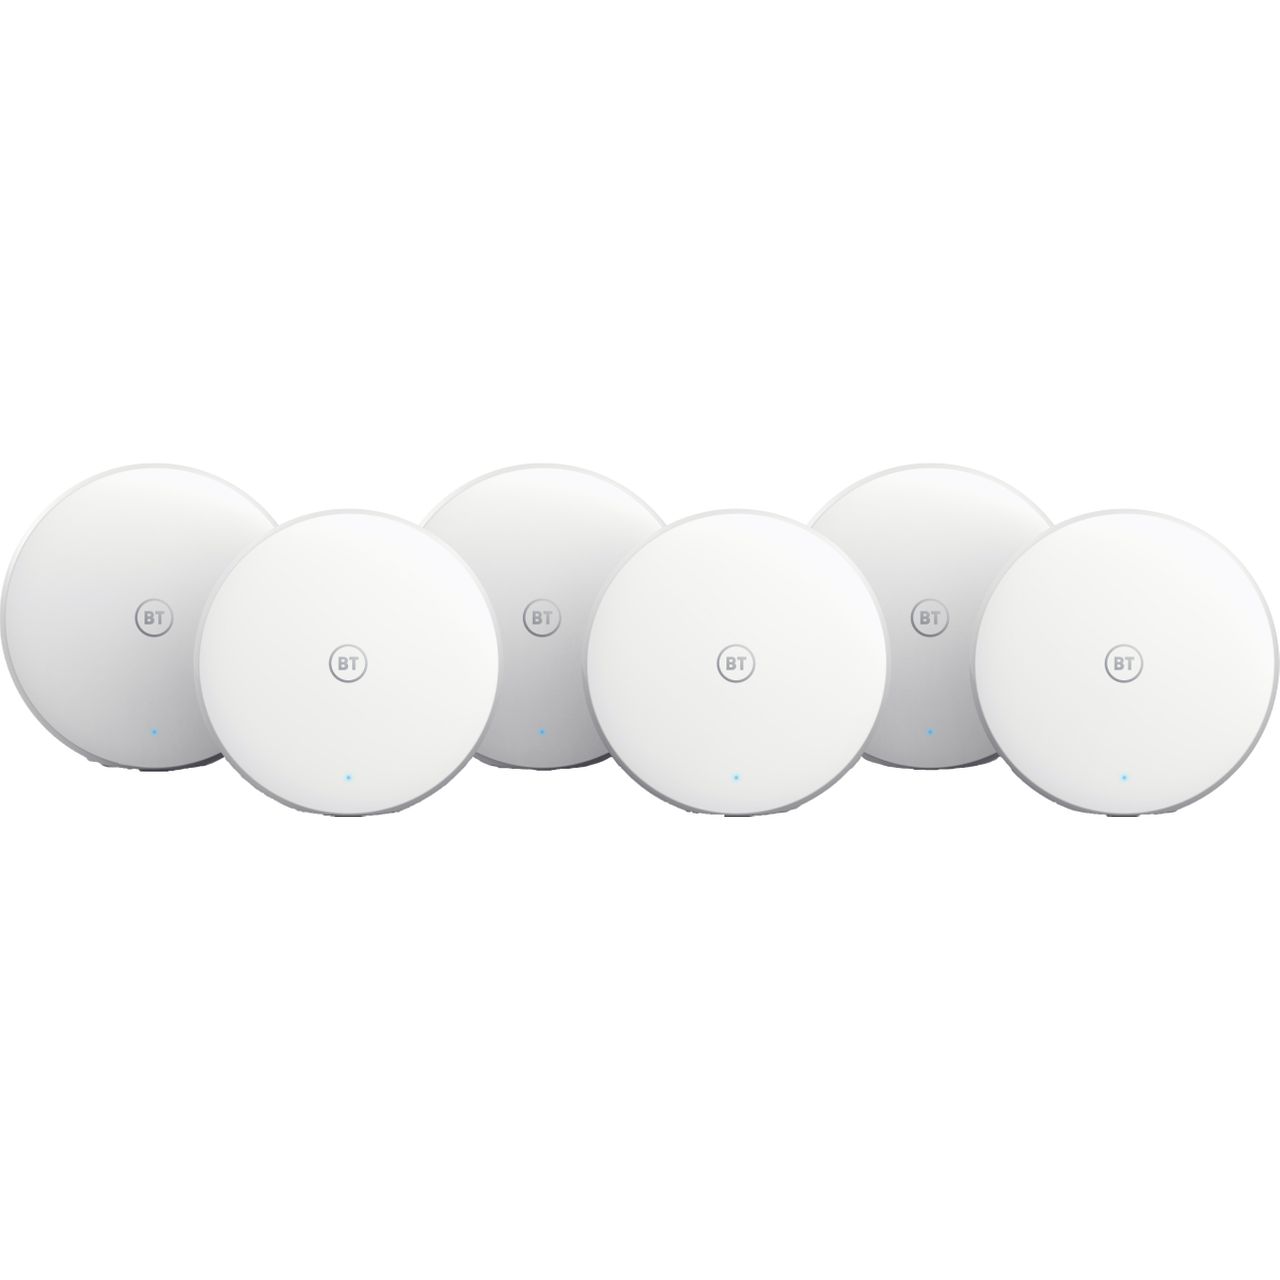 BT Mini Whole Home WiFi (6-Pack) for Mesh Network Review